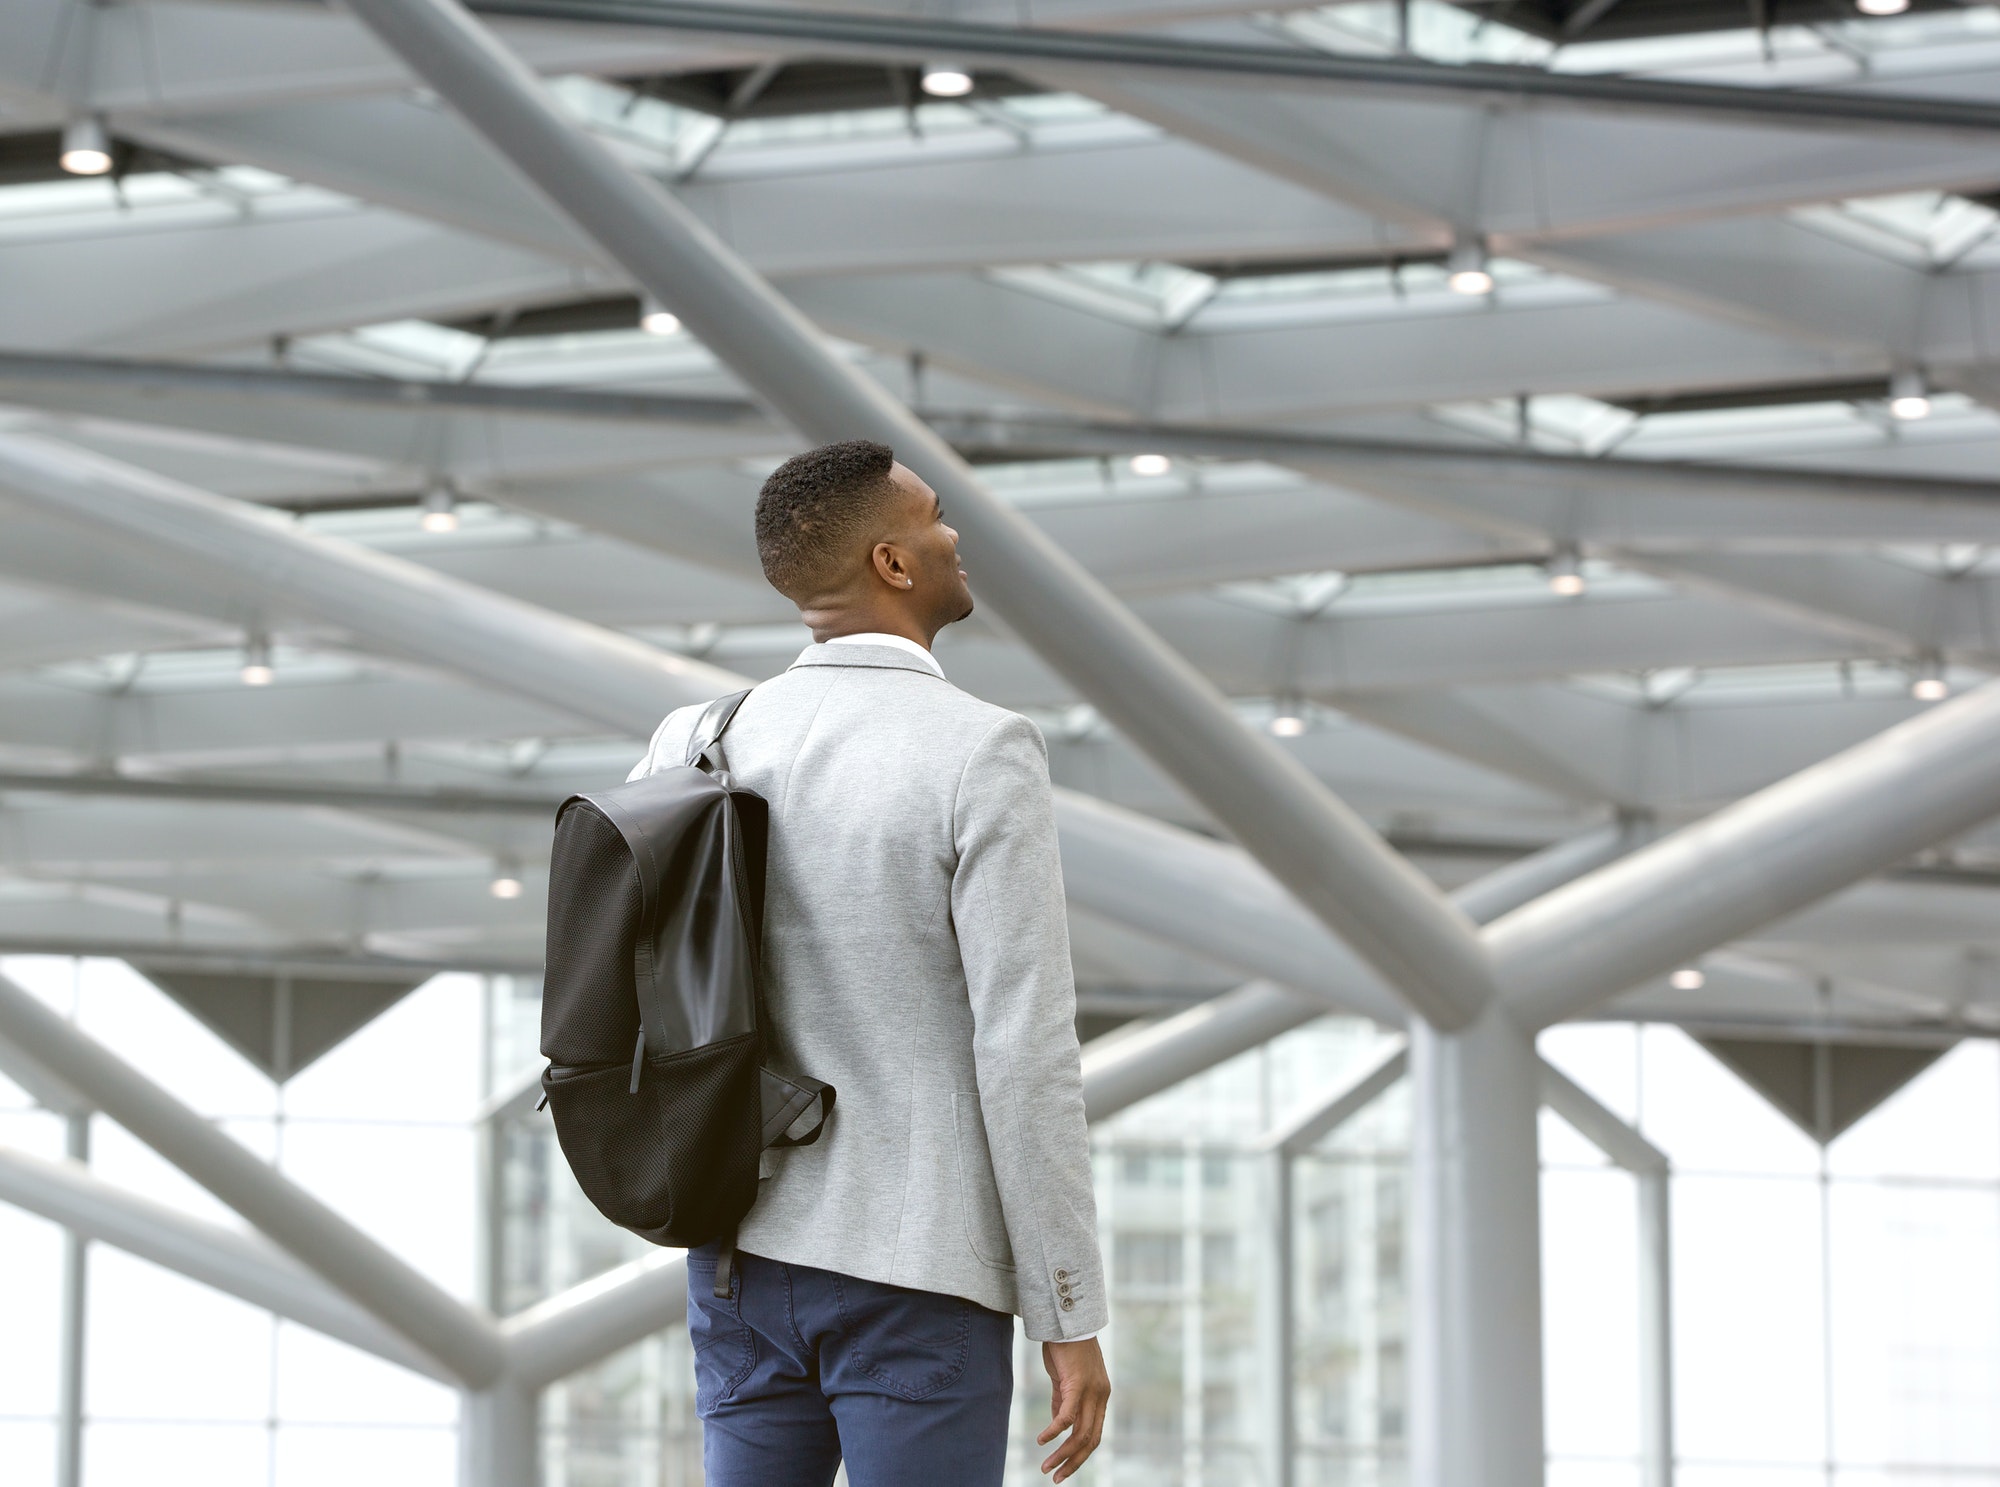 Black man standing alone in airport with bag